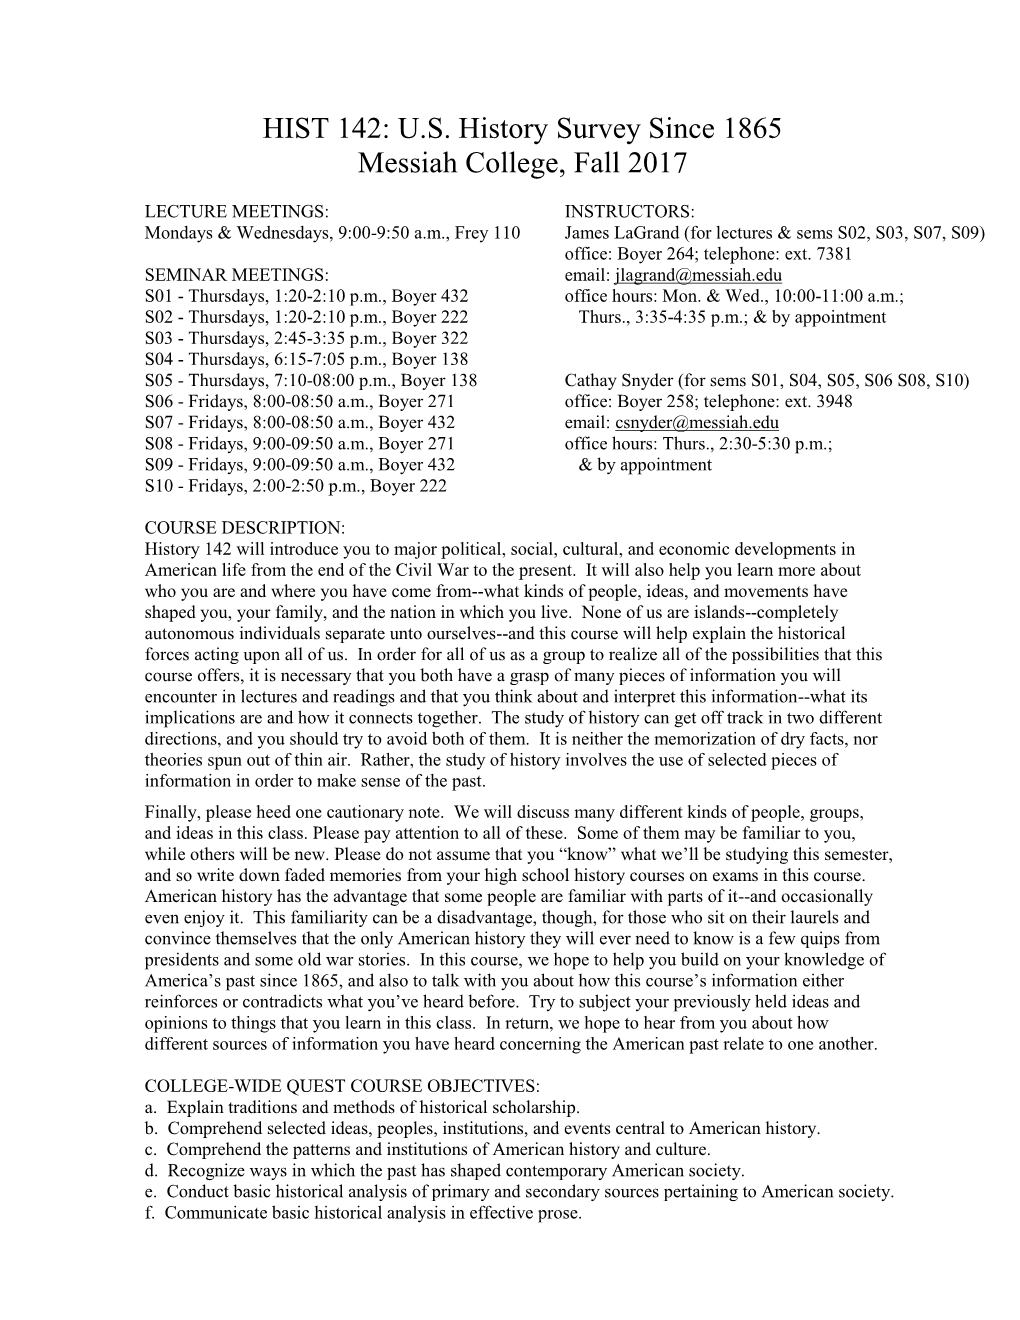 HIST 142: US History Survey Since 1865 Messiah College, Fall 2017